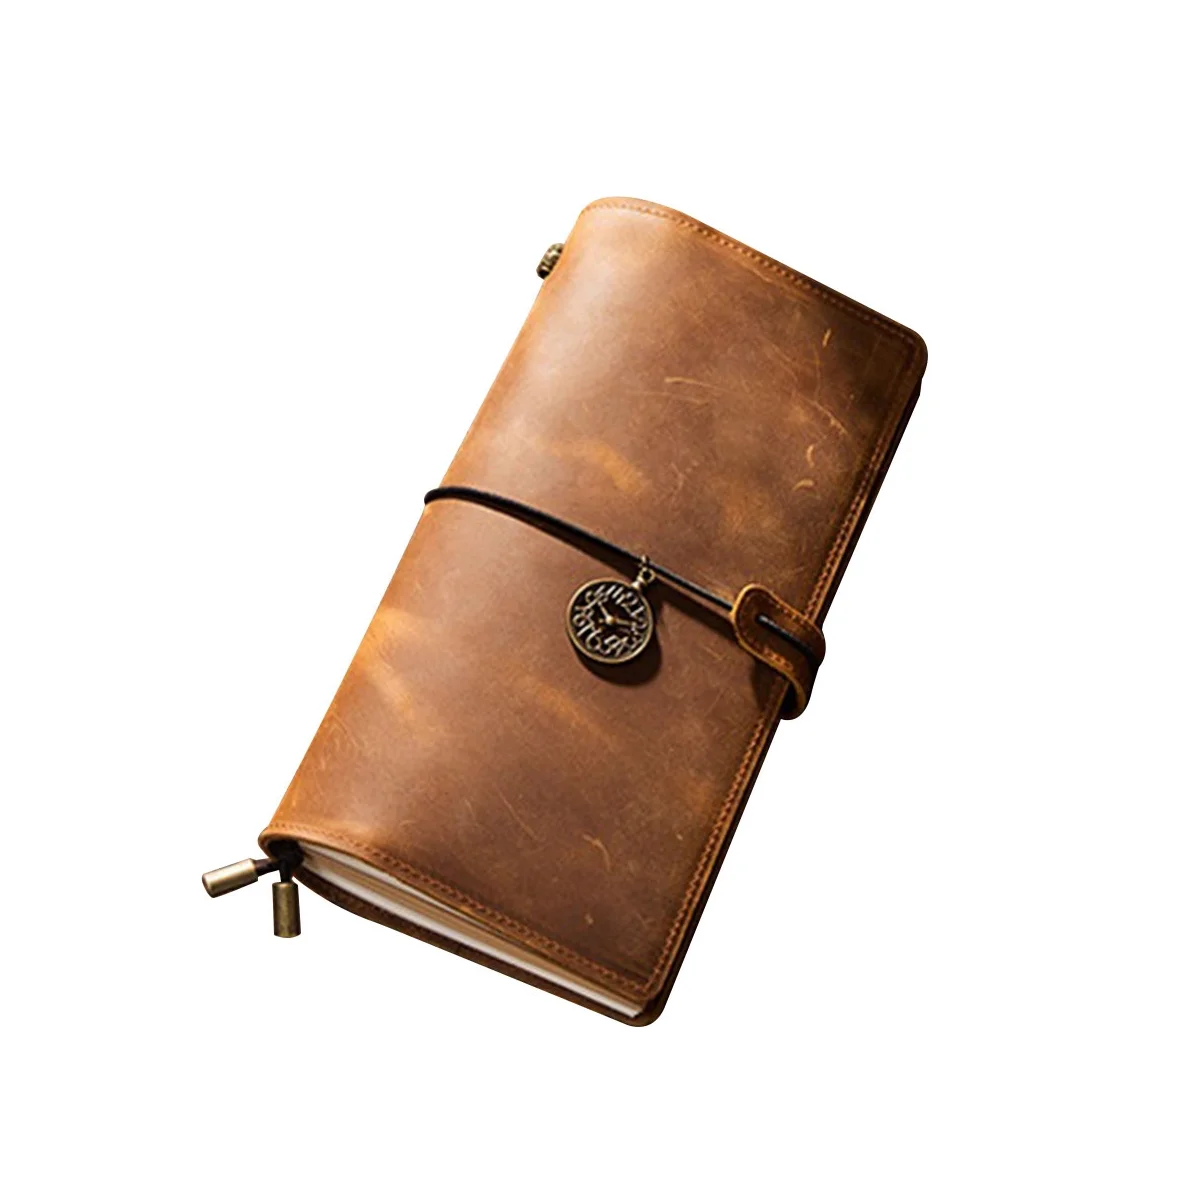 

Leather Notebook - A6 Vintage Travelers Journal Hand-Crafted Leather for Writing/Poets/Travelers/Daily Note